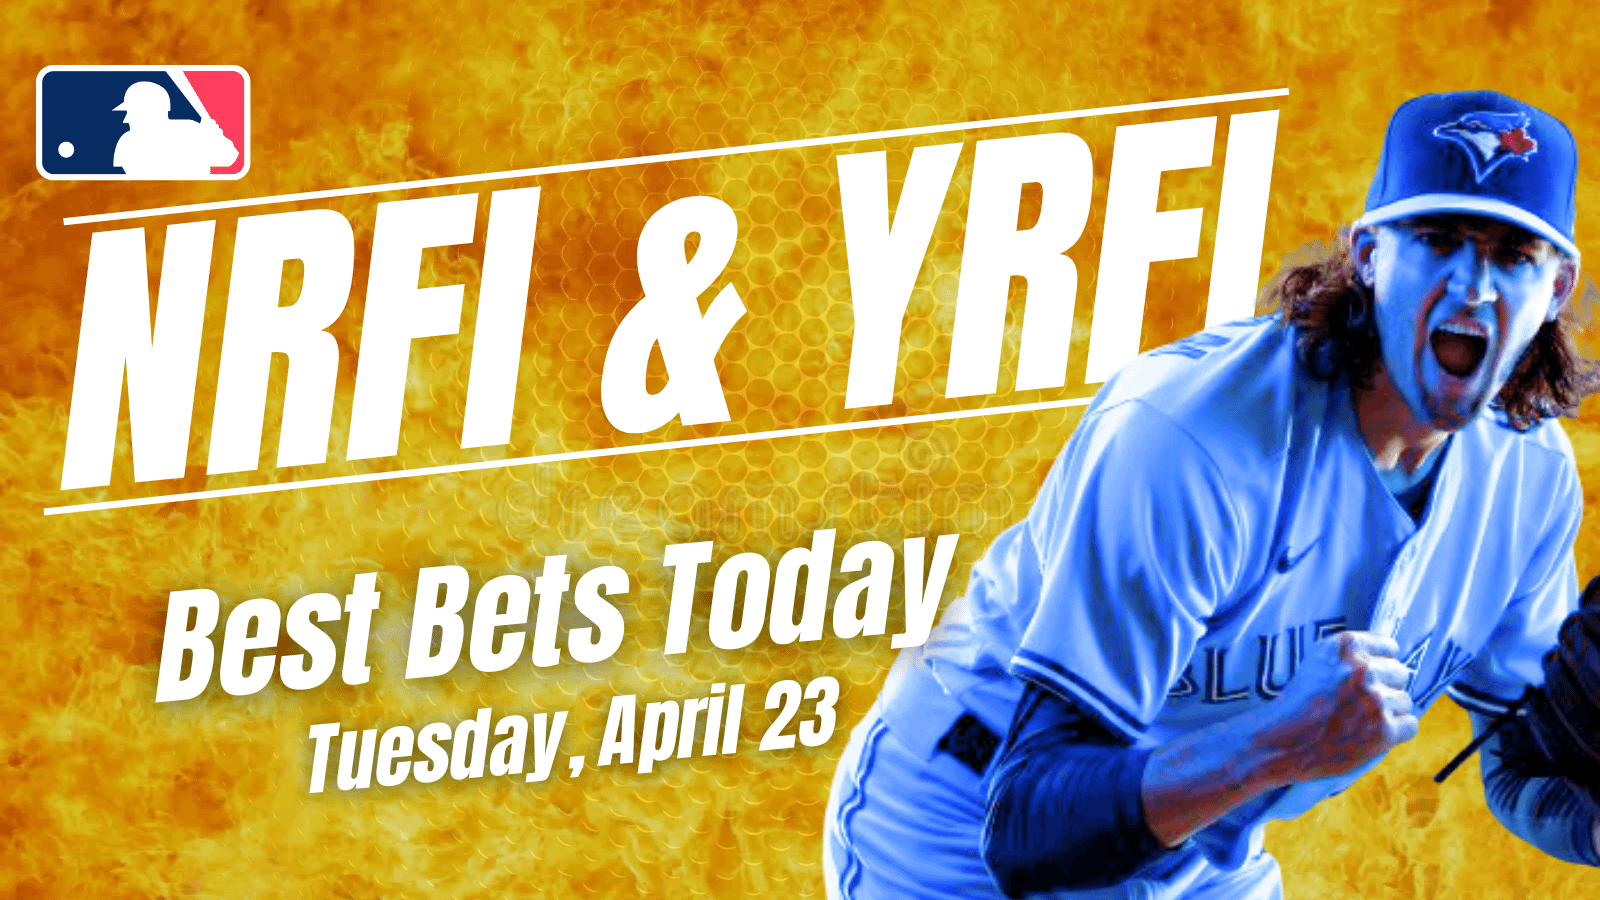 Looking for the top NRFI & YRFI bets today? We dive into the best first inning bets for Tuesday, April 23, including...